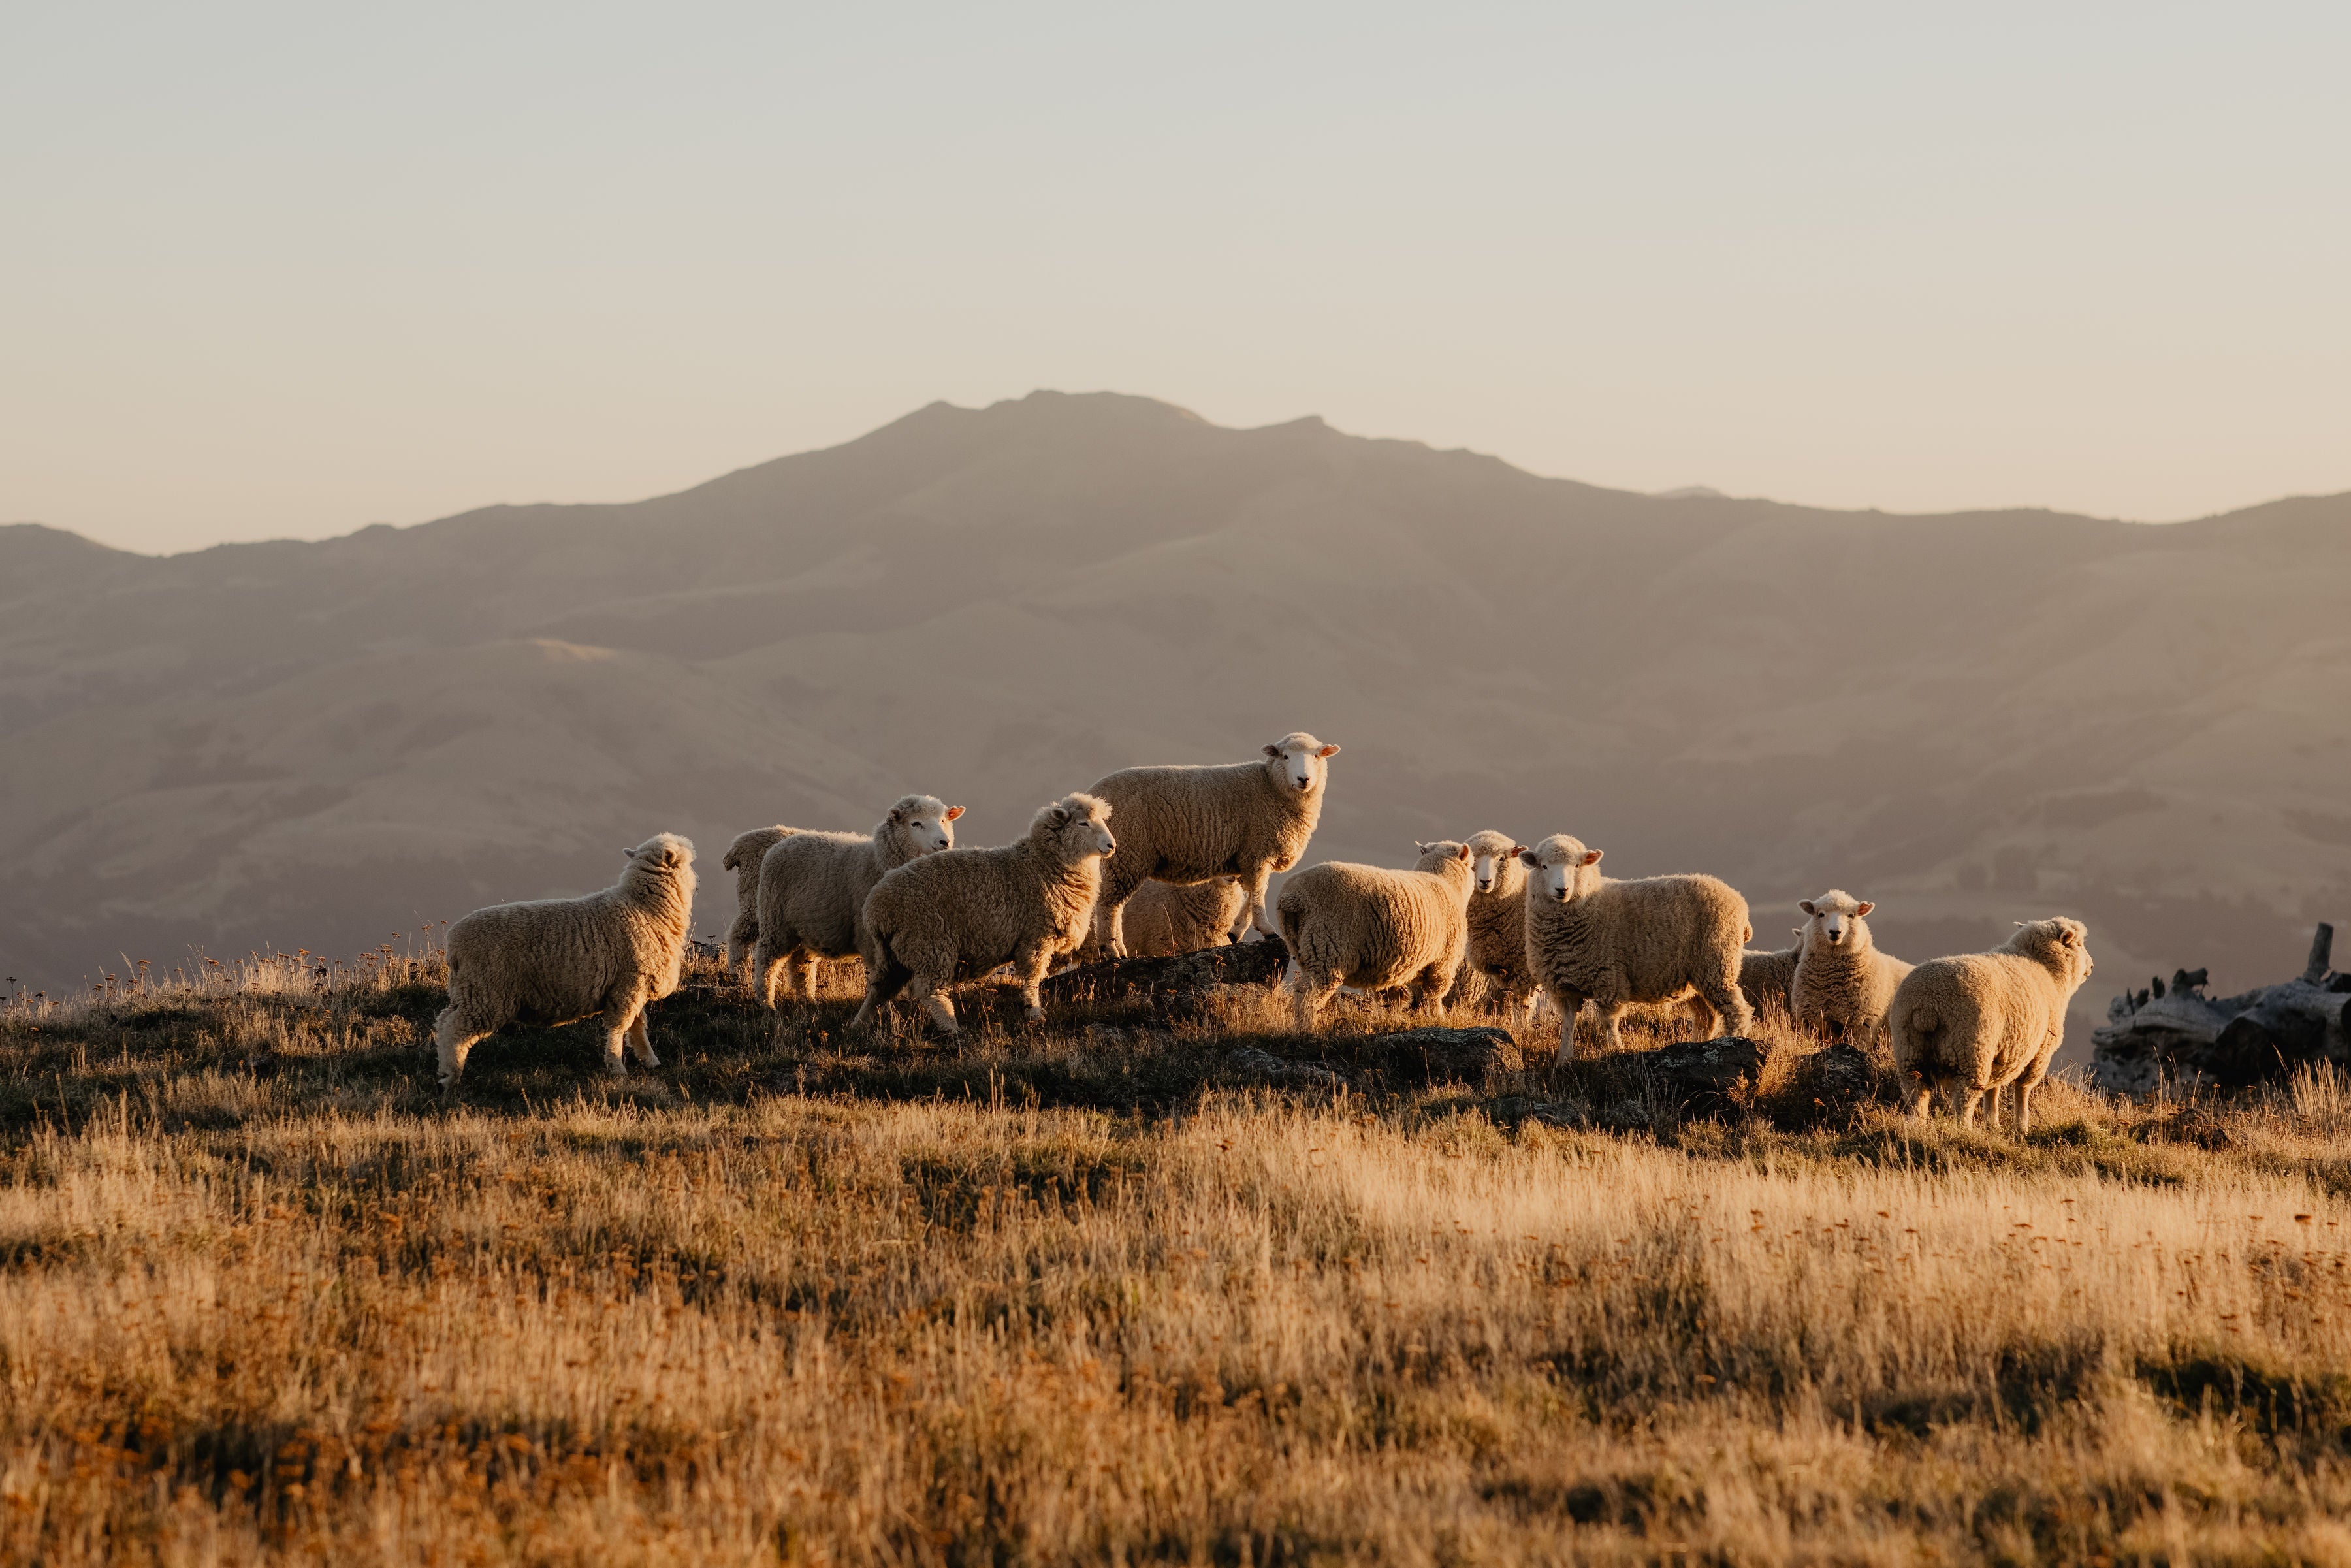 WHERE DOES MERINO WOOL COME FROM? – Baby in Merino